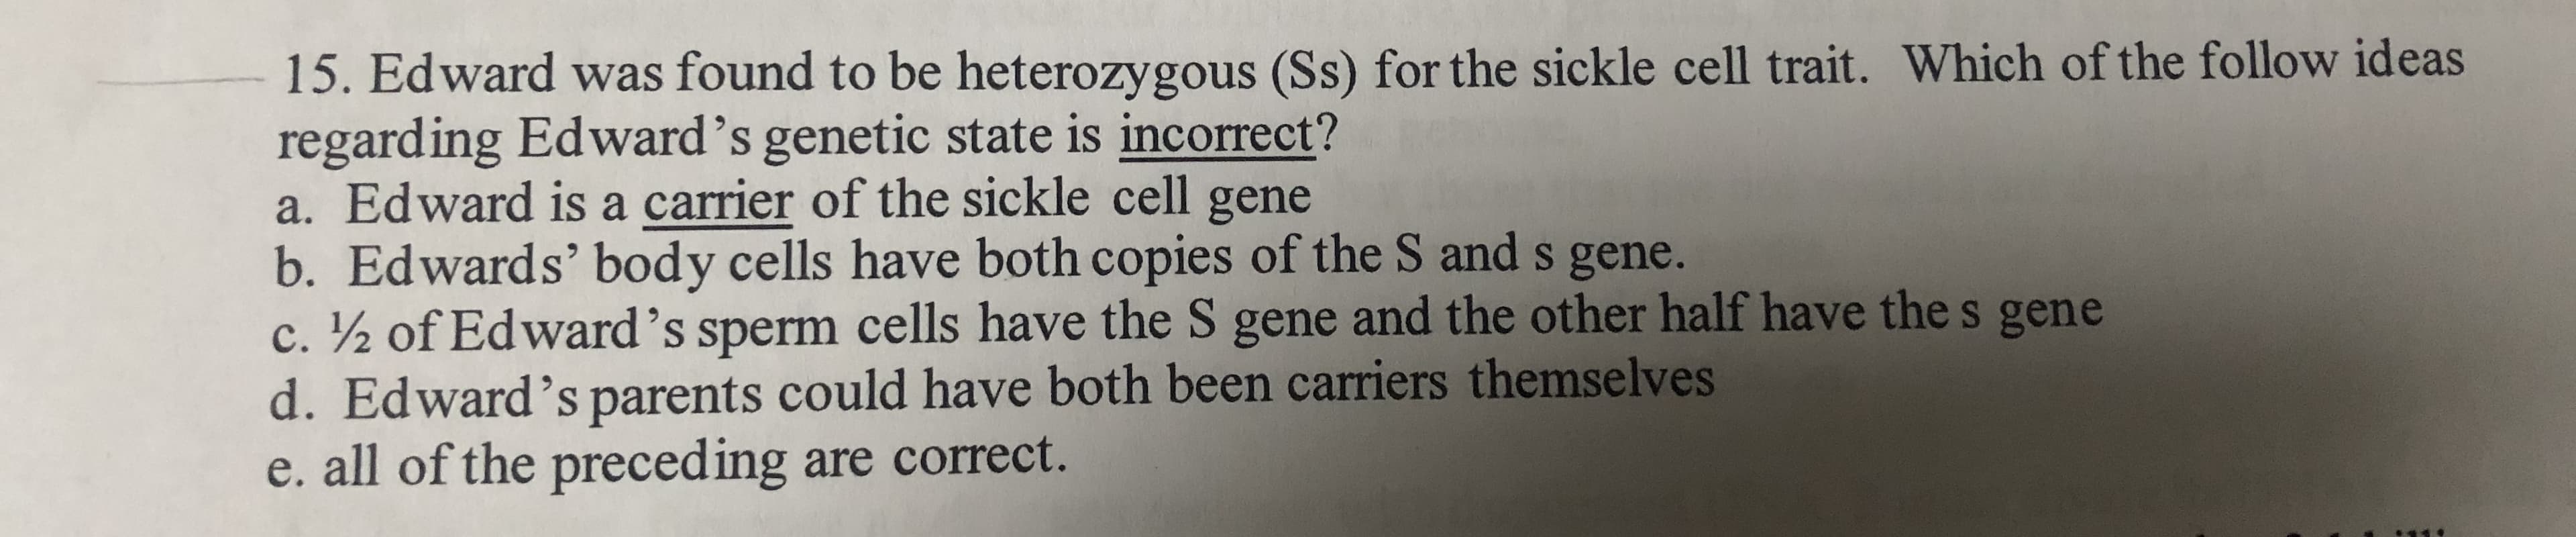 15. Edward was found to be heterozygous (Ss) for the sickle cell trait. Which of the follow ideas
regarding Edward's genetic state is incorrect?
a. Edward is a carrier of the sickle cell gene
b. Edwards' body cells have both copies of the S and s gene.
c. ½ of Edward's sperm cells have the S gene and the other half have the s gene
d. Edward's parents could have both been carriers themselves
e. all of the preceding are correct.
